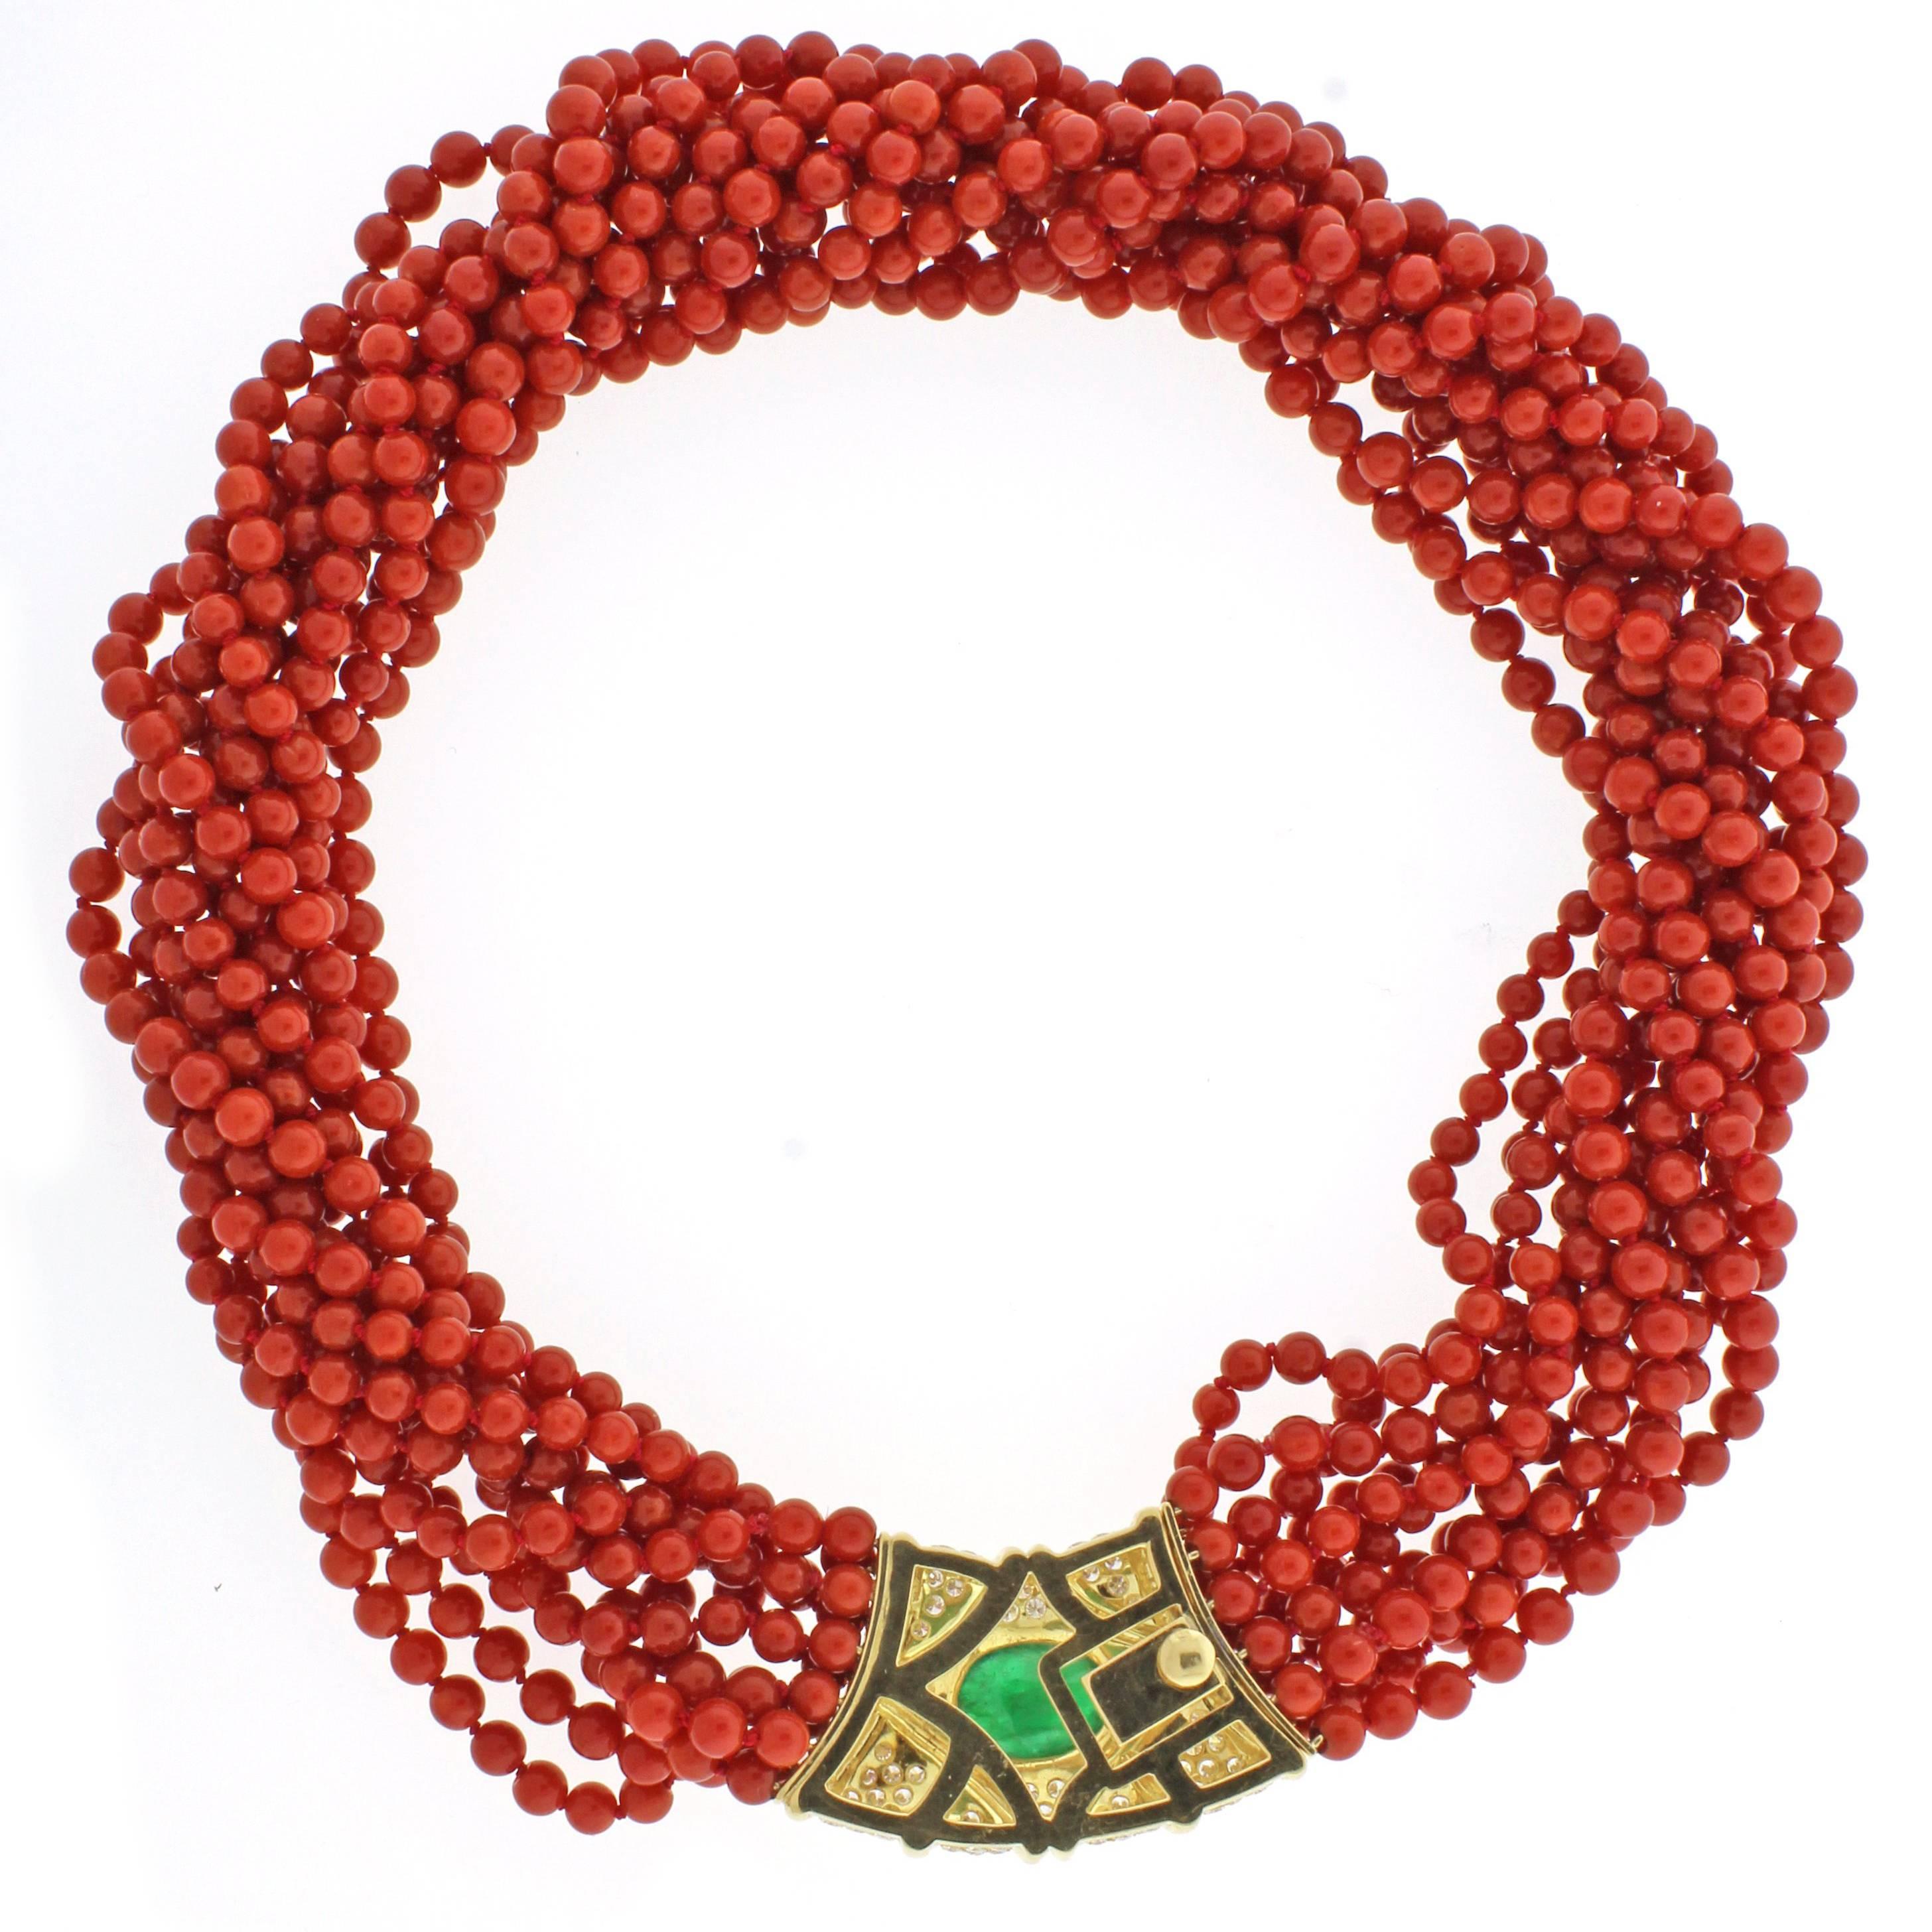 This stylish necklace is comprised of eleven stands of red 4.5-5mm coral beads with an impressive diamond and emerald clasp. The clasp contains 74 brilliant diamonds weighing  approximately 2.75 carats and a cabochon emerald weighing approximately